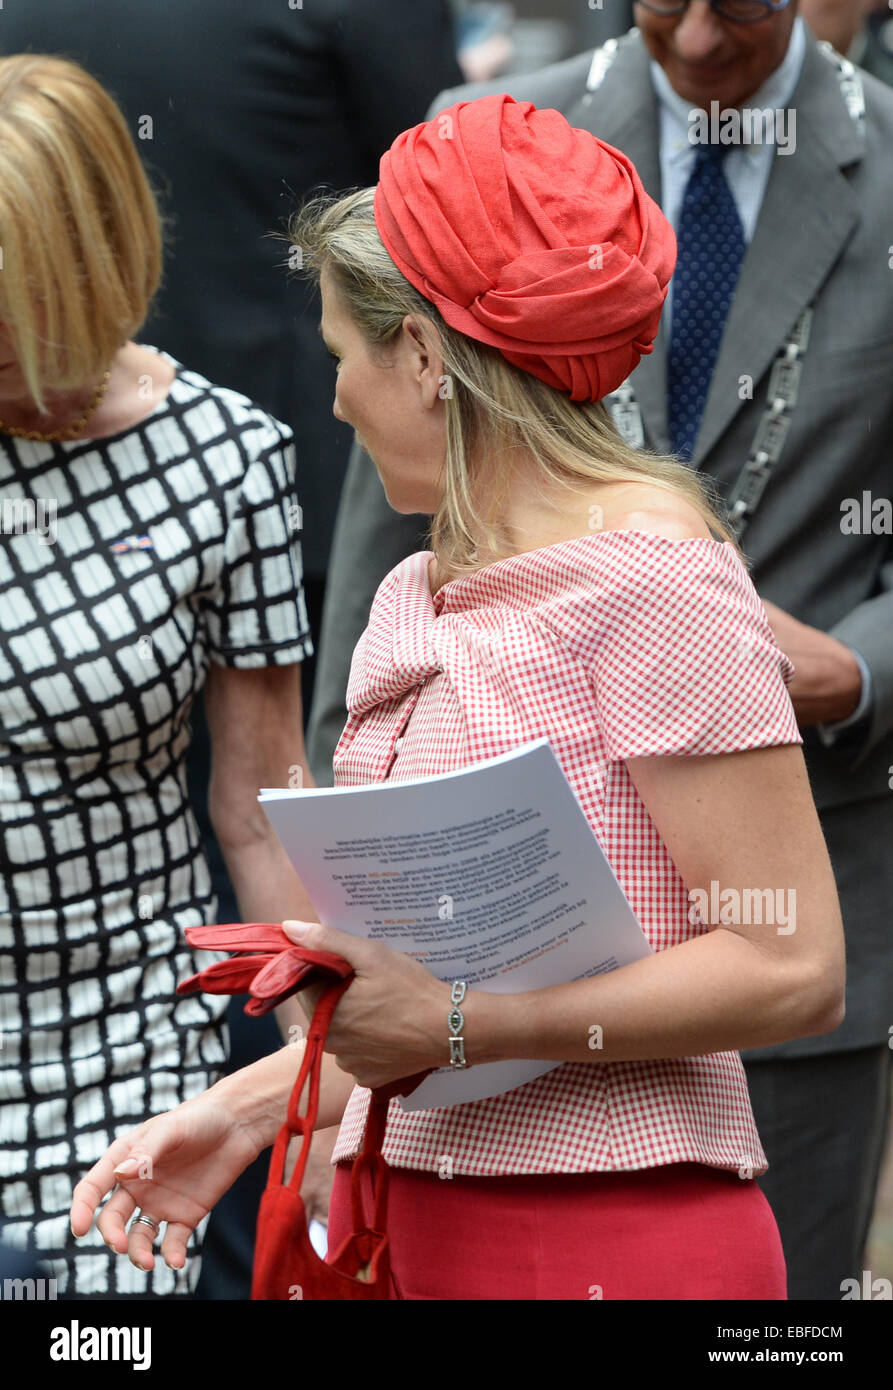 Queen Maxima of the Netherlands attending World MS Day (World Multiple Sclerosis Day) of MS Research Foundation. She received the first copy of the Dutch edition of the International World MS Atlas.  Featuring: Queen Maxima of the Netherlands Where: Voorschoten, Netherlands When: 28 May 2014 Stock Photo